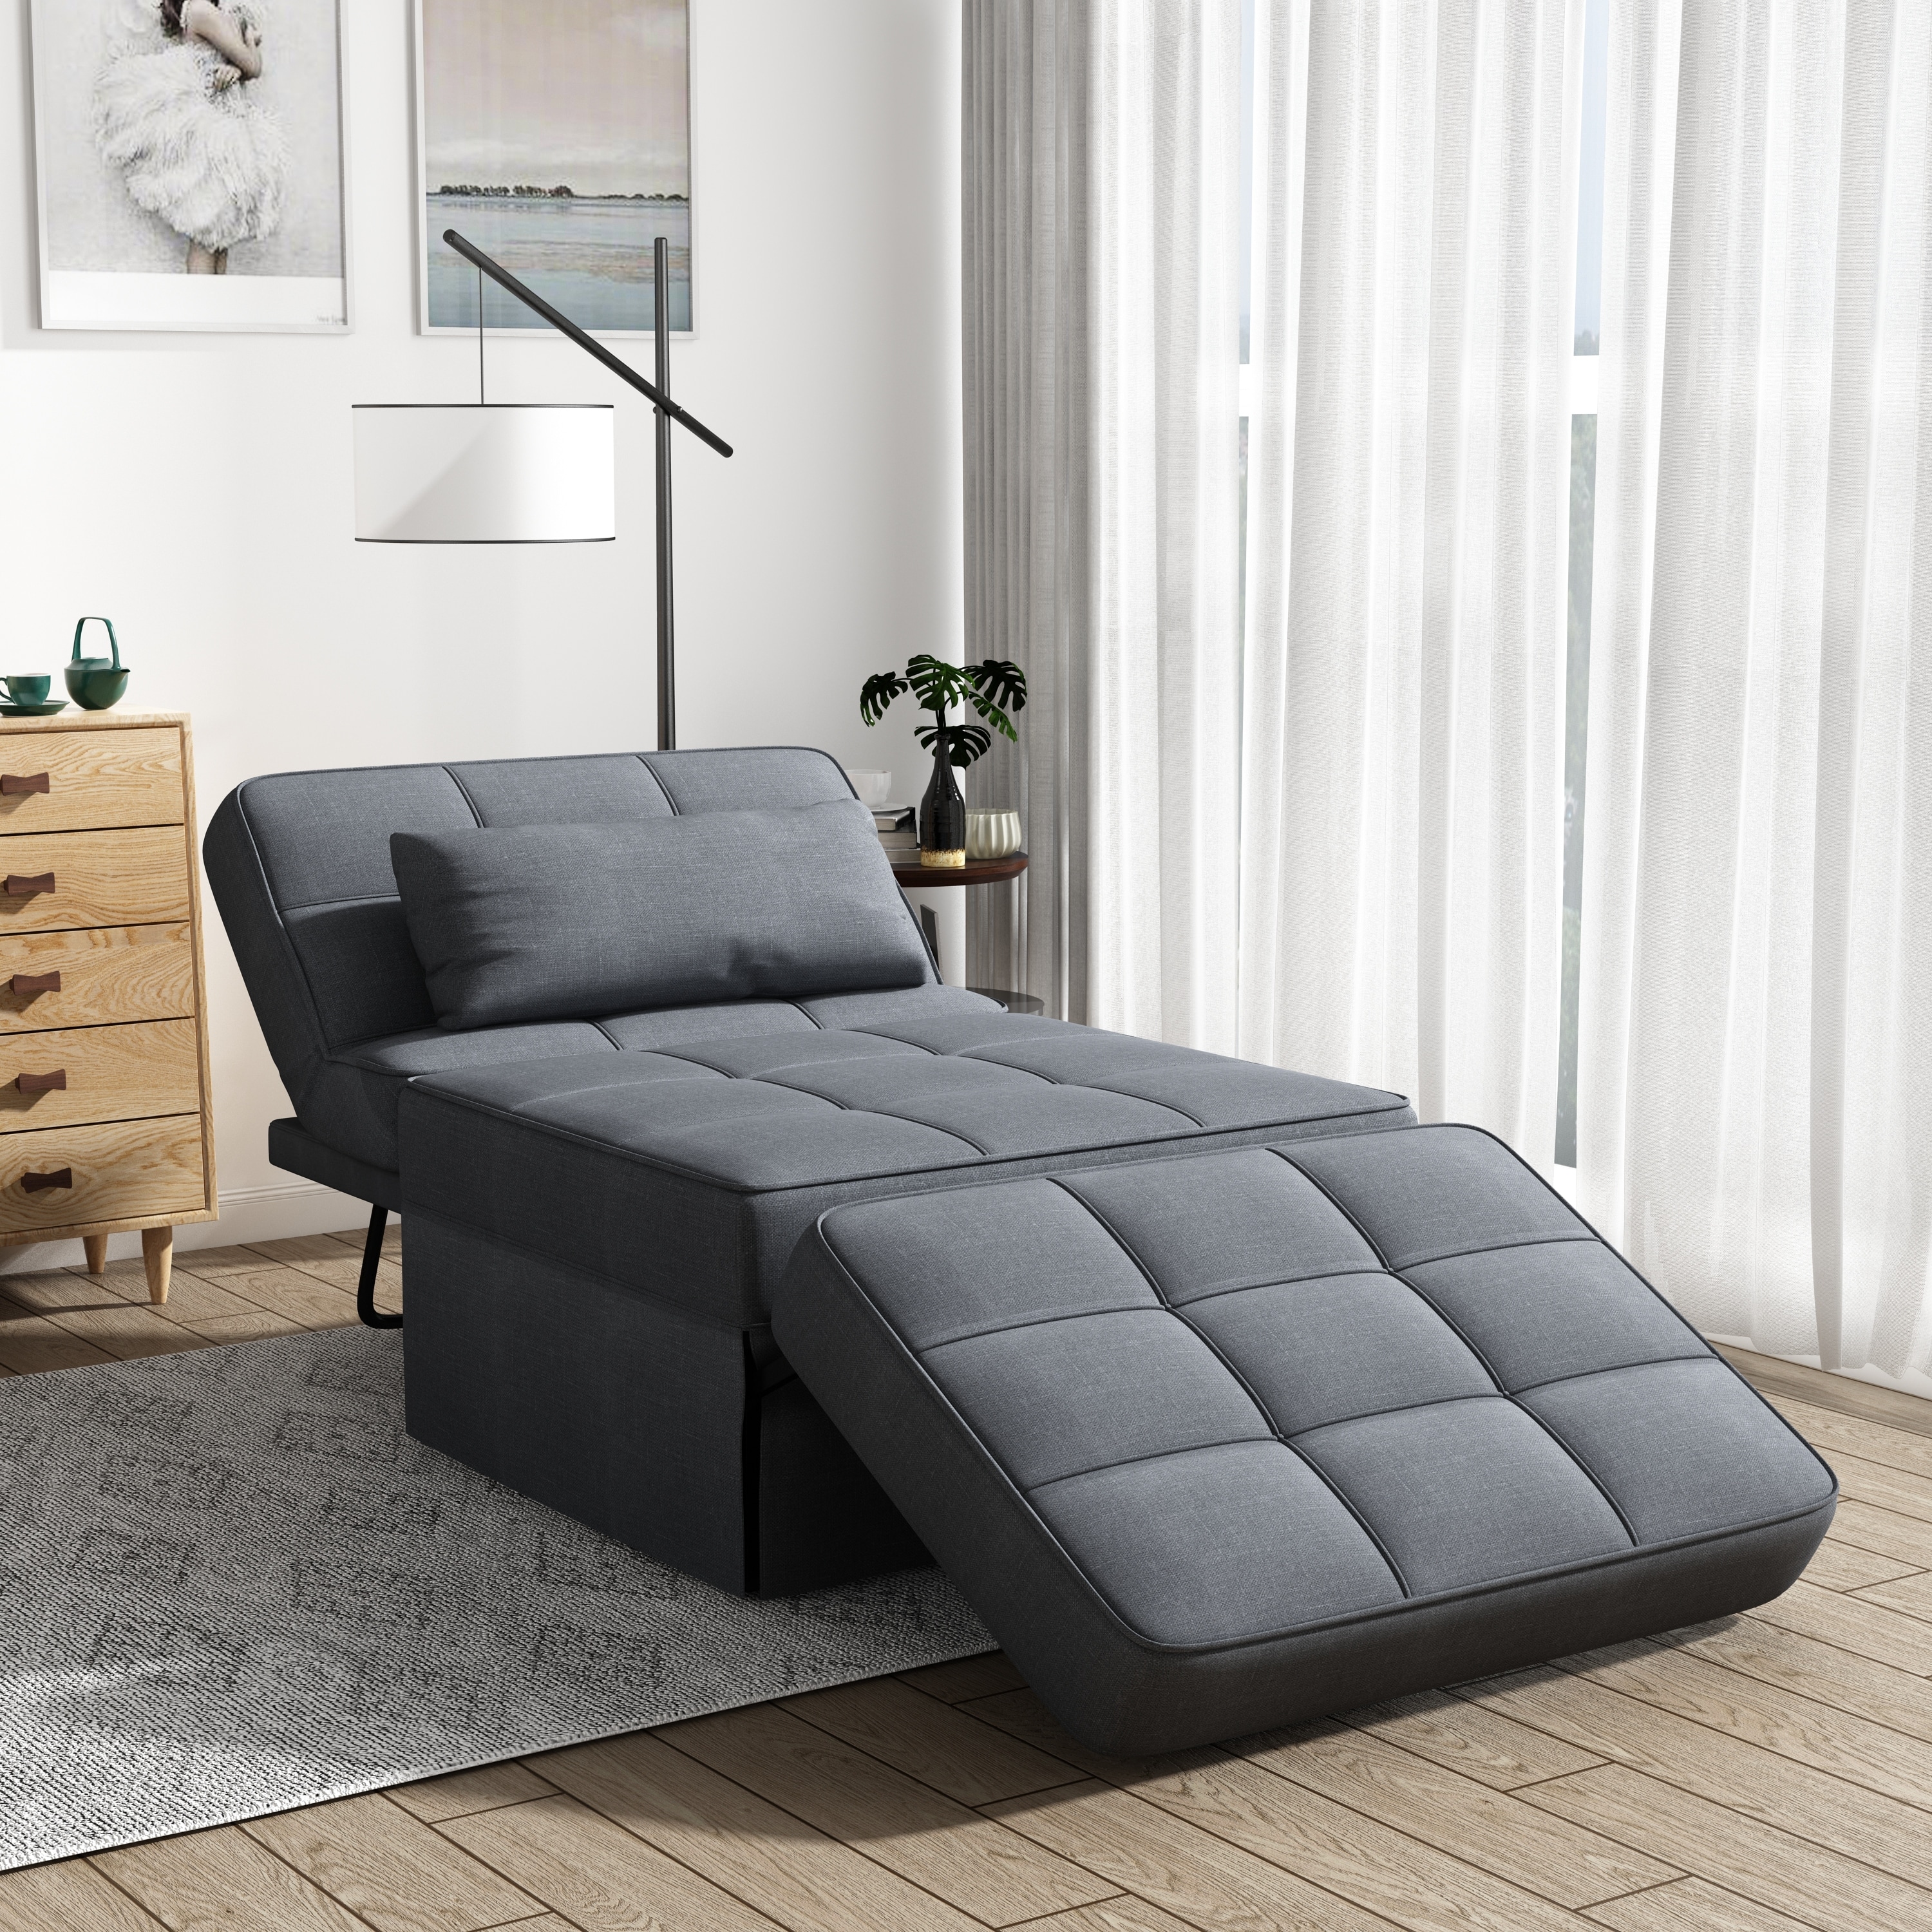 https://ak1.ostkcdn.com/images/products/is/images/direct/7ae132ef01492b526cc9e97a5d0f026f76543095/Single-Sofa-Bed-Modern-Upholstery-Recliner-Bed-Ottoman-for-Living-Room.jpg